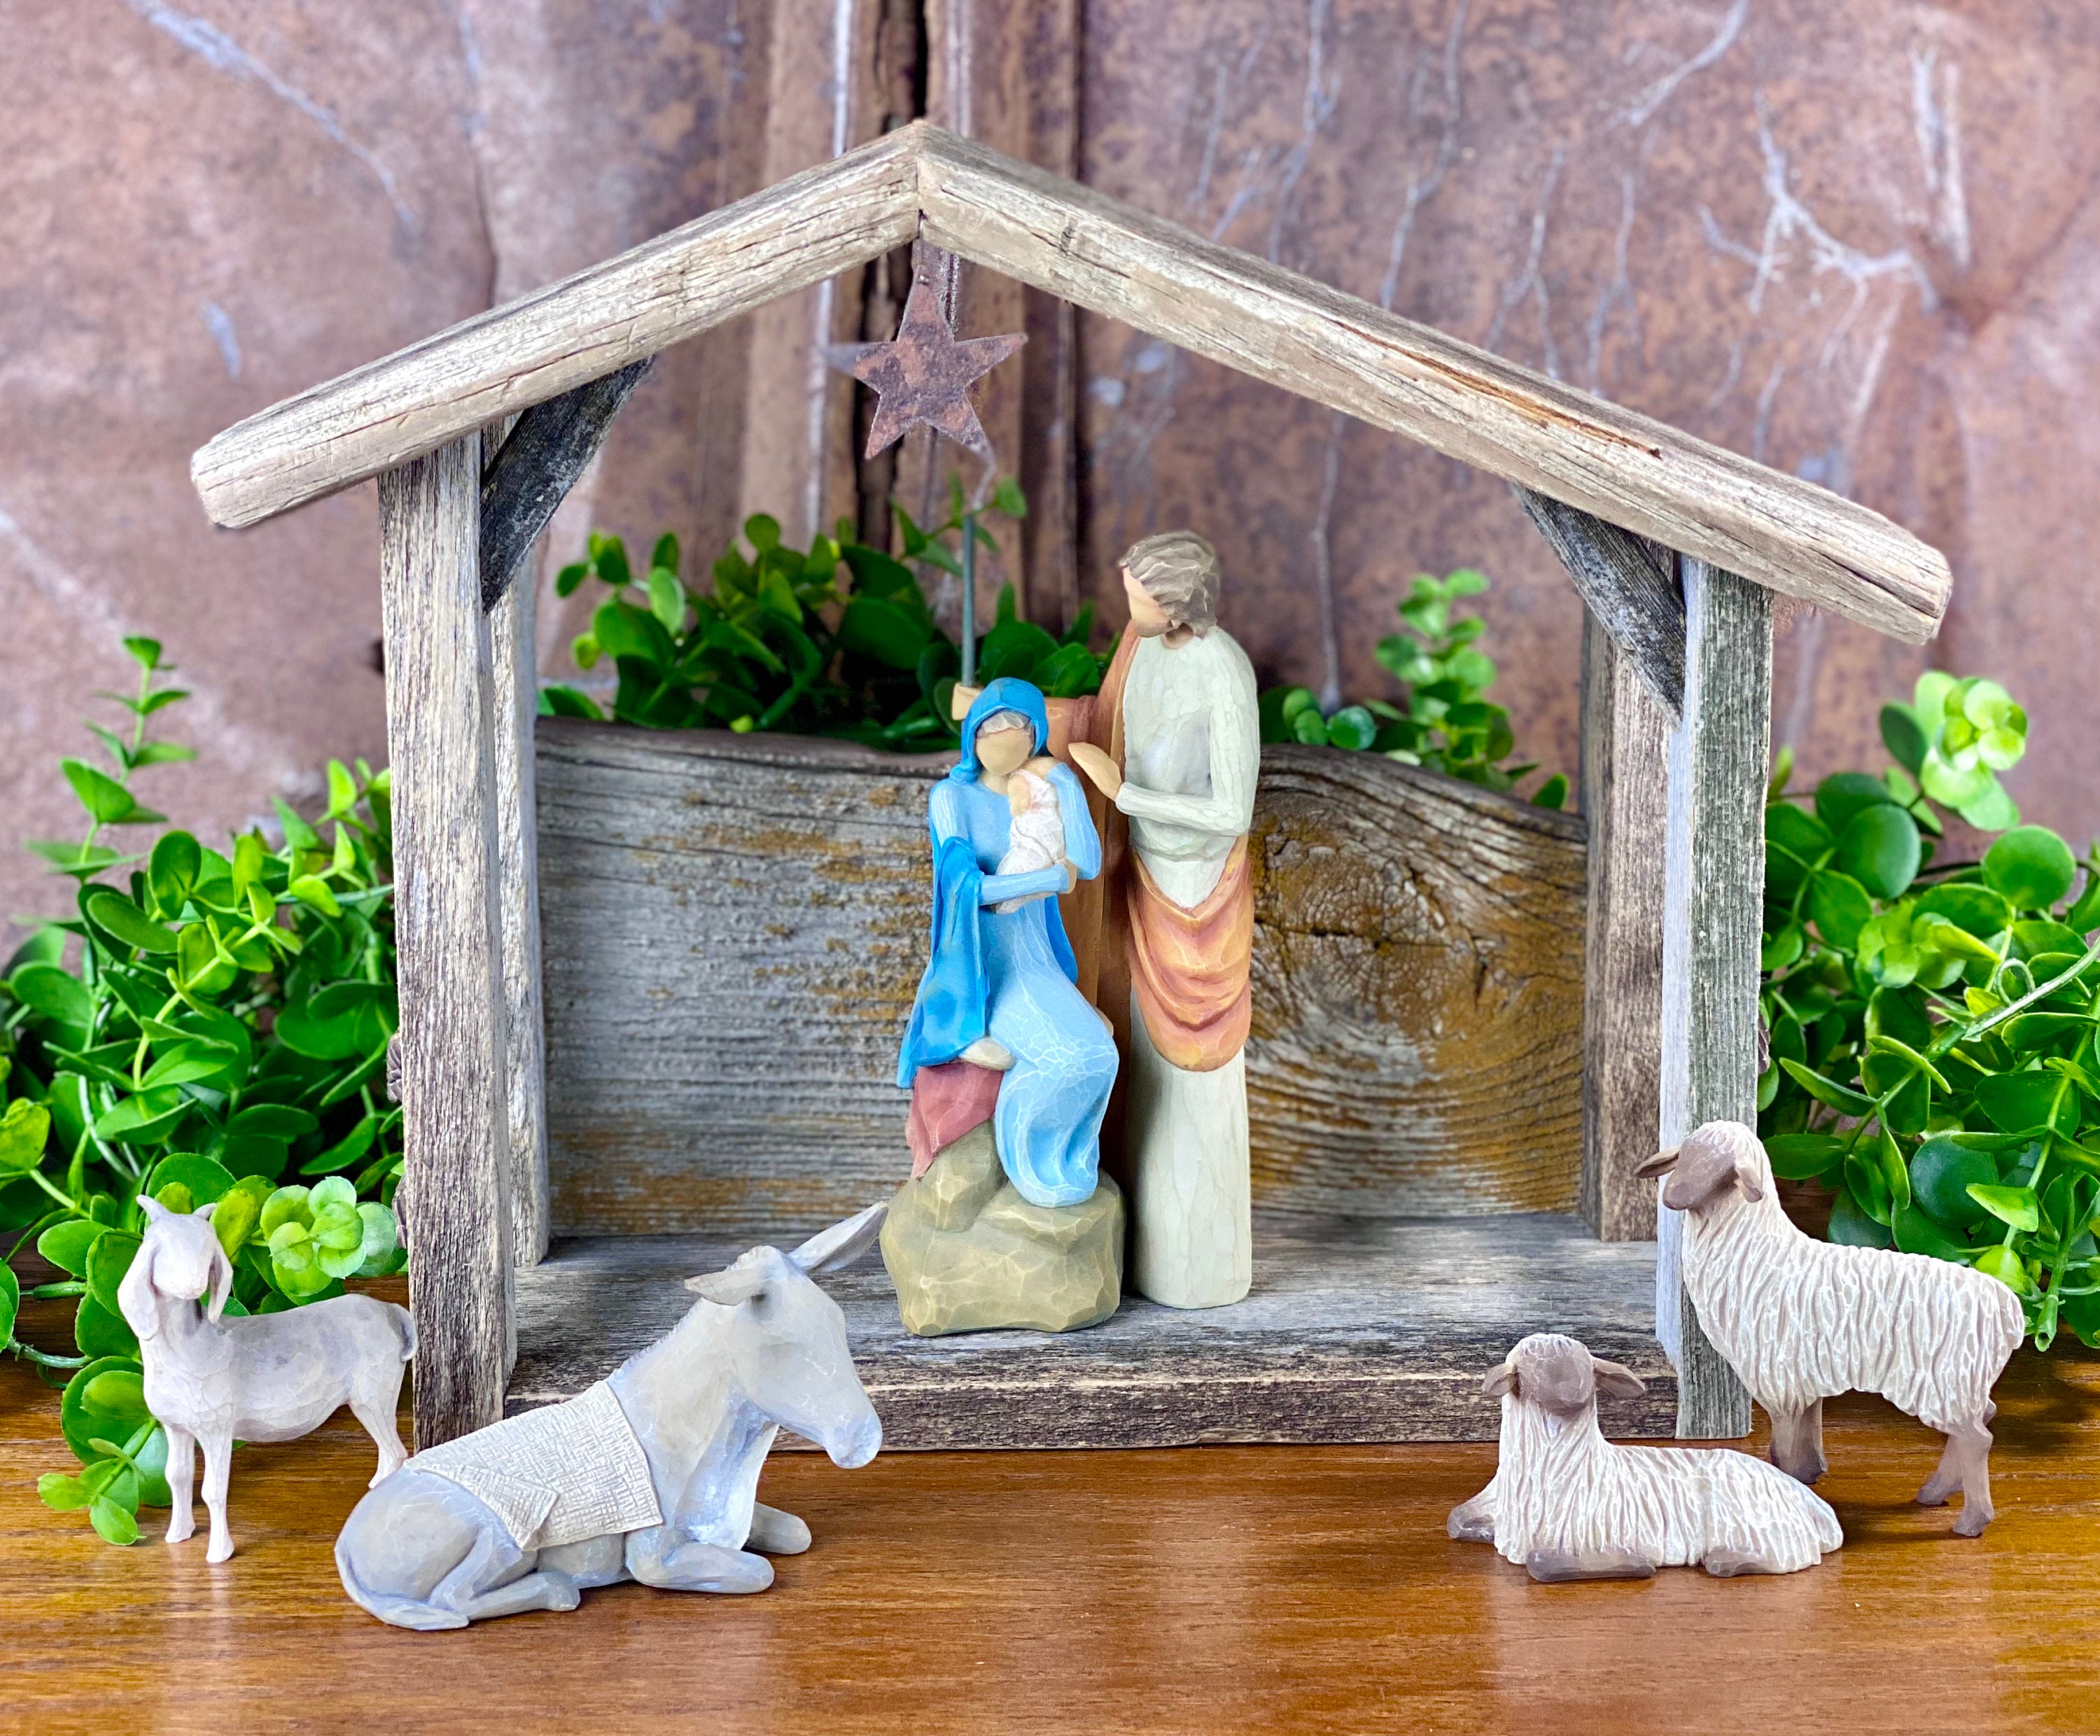 Willow Tree Shepherd And Stable Animals 7 Hand-Painted Resin Figure Set  (26105) For Sale Online | Willow Tree Hand Painted Sculpted Figures,  Nativity Sets Shepherd Stable Animals, 4/piece Holiday Ornaments_qq |  